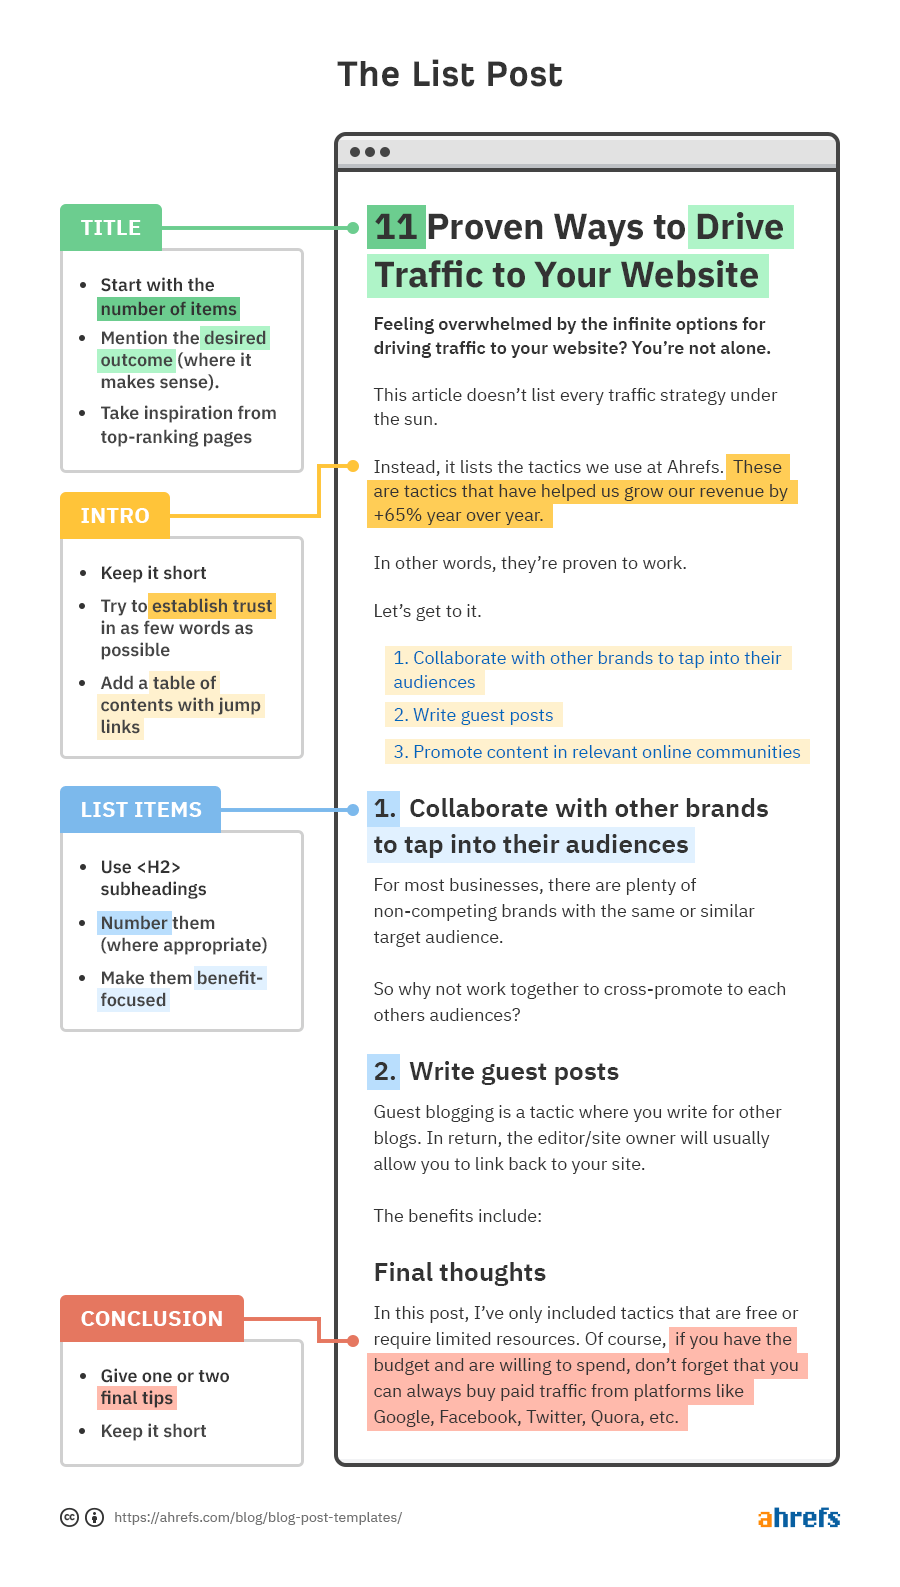 Infographic showing 4 sections: title, intro, list items, conclusion